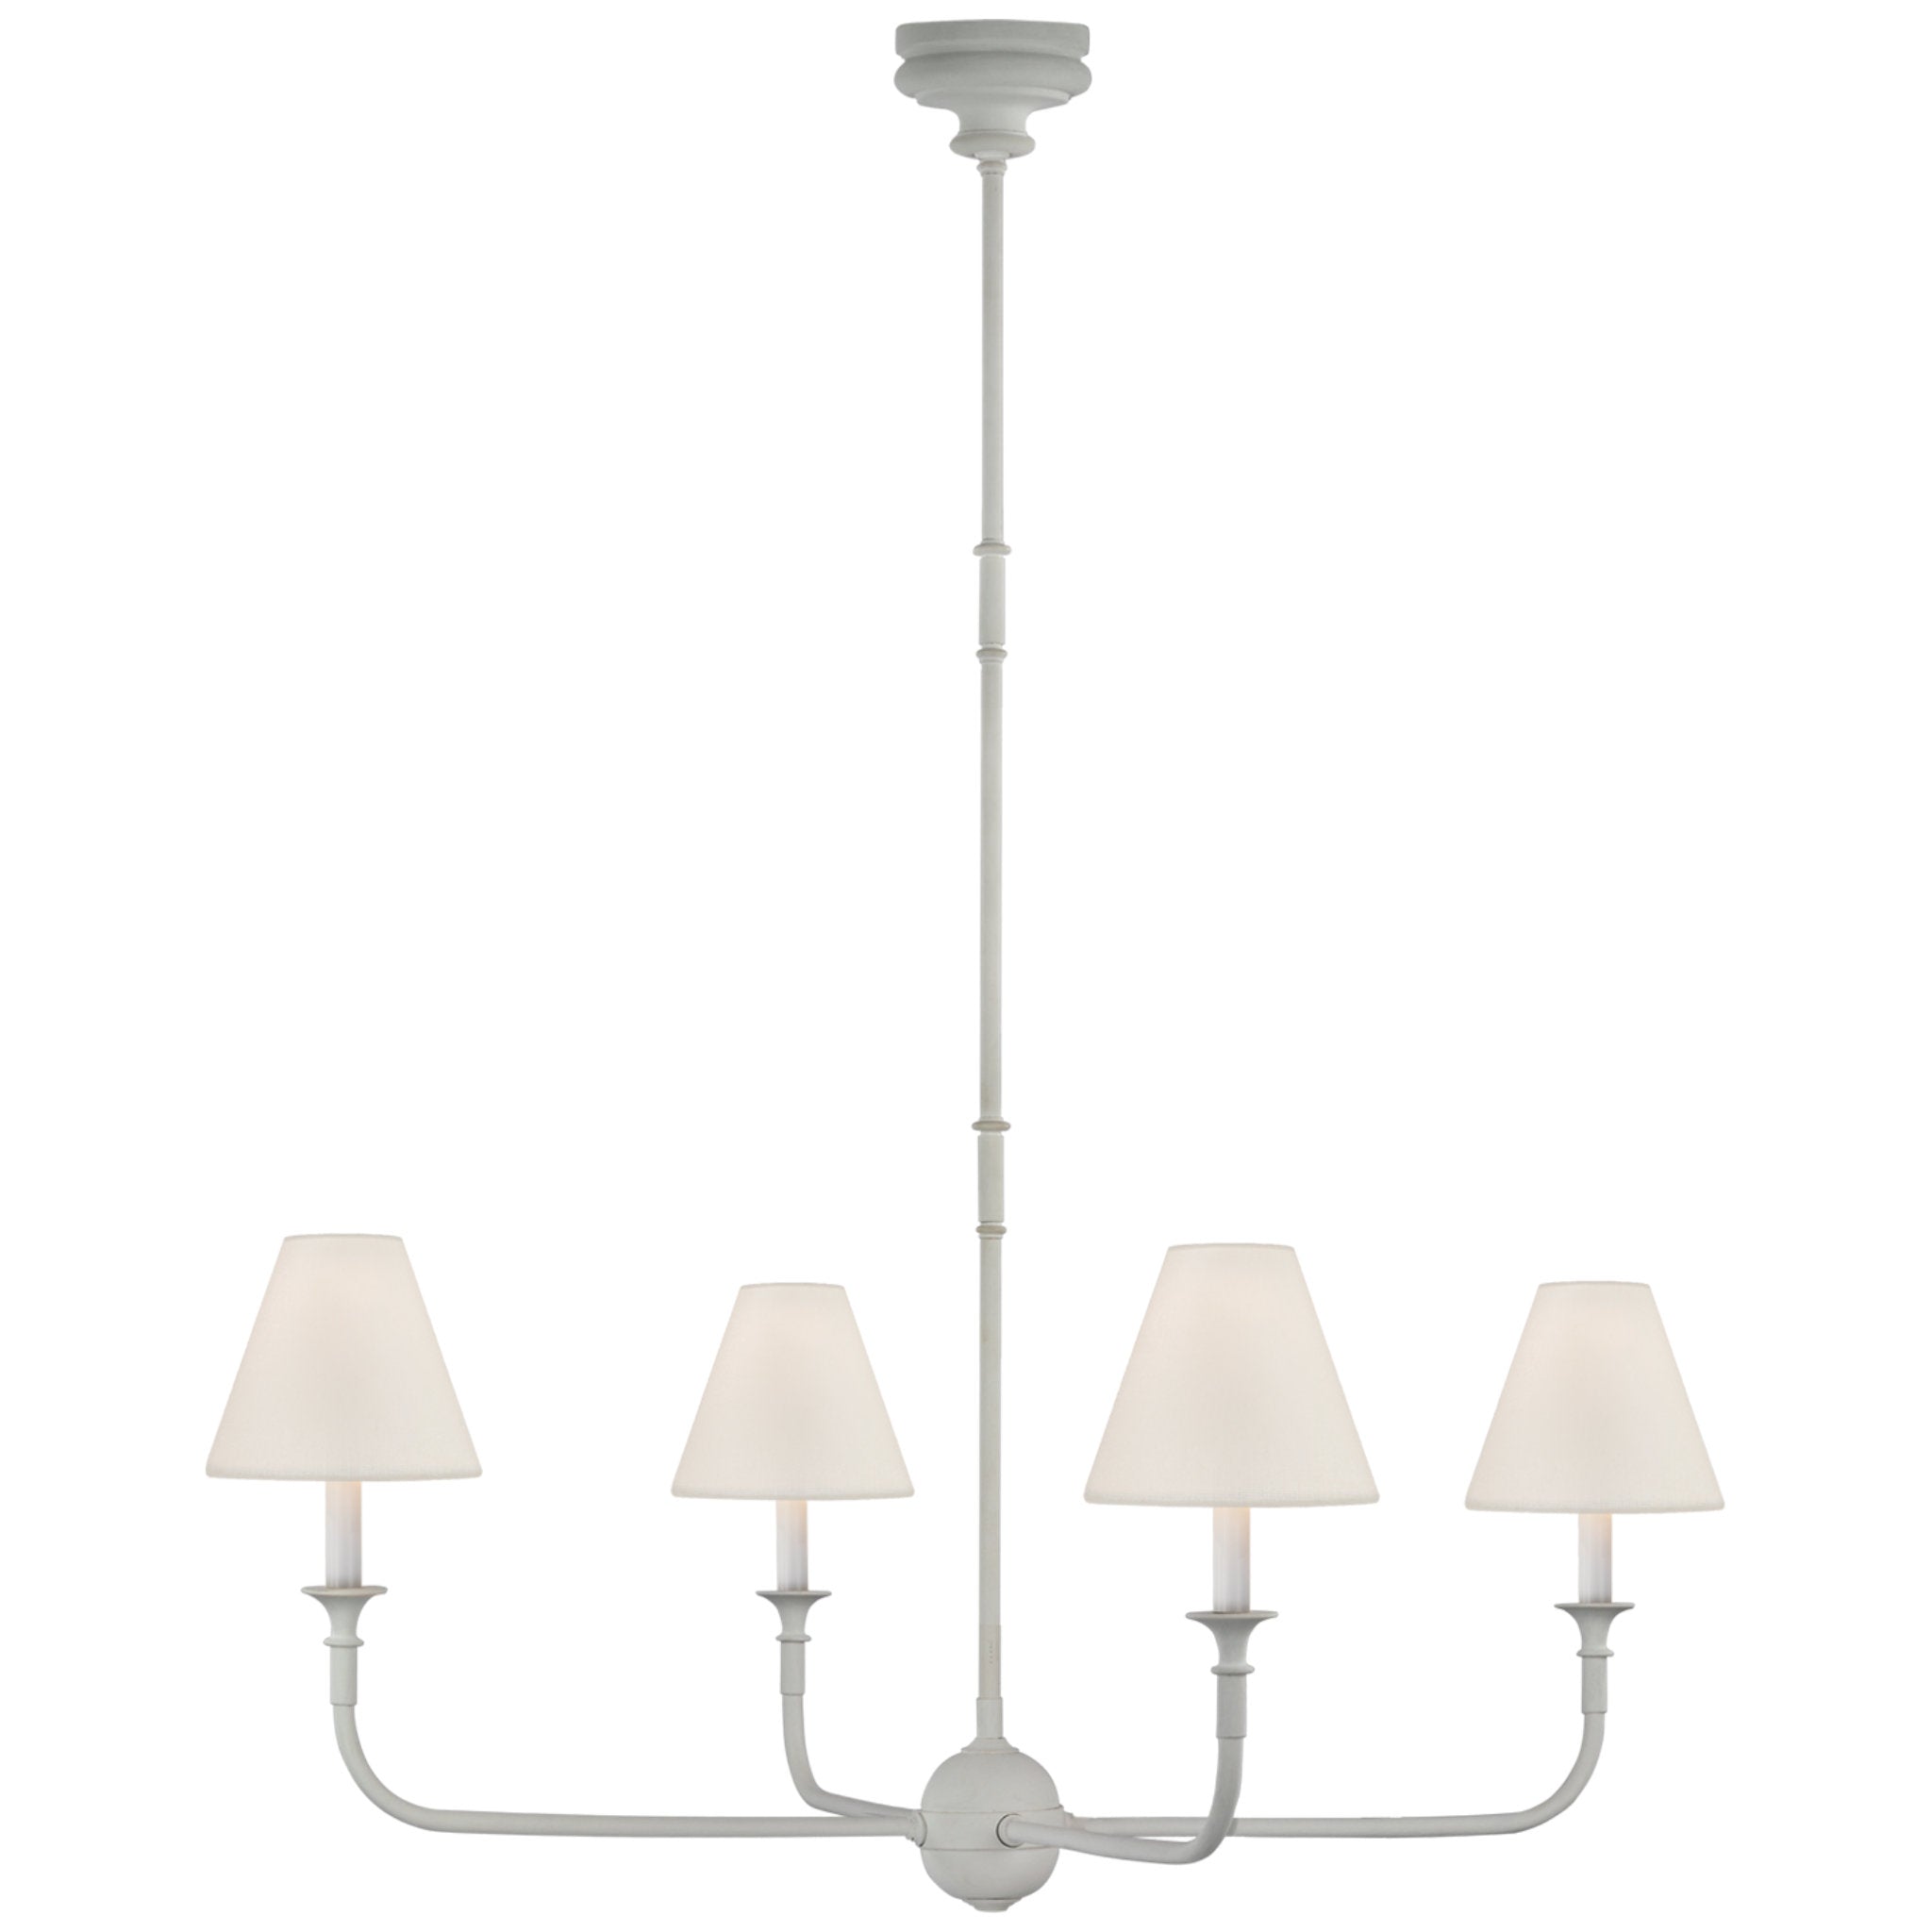 Thomas O'Brien Piaf Large Chandelier in Plaster White with Linen Shades